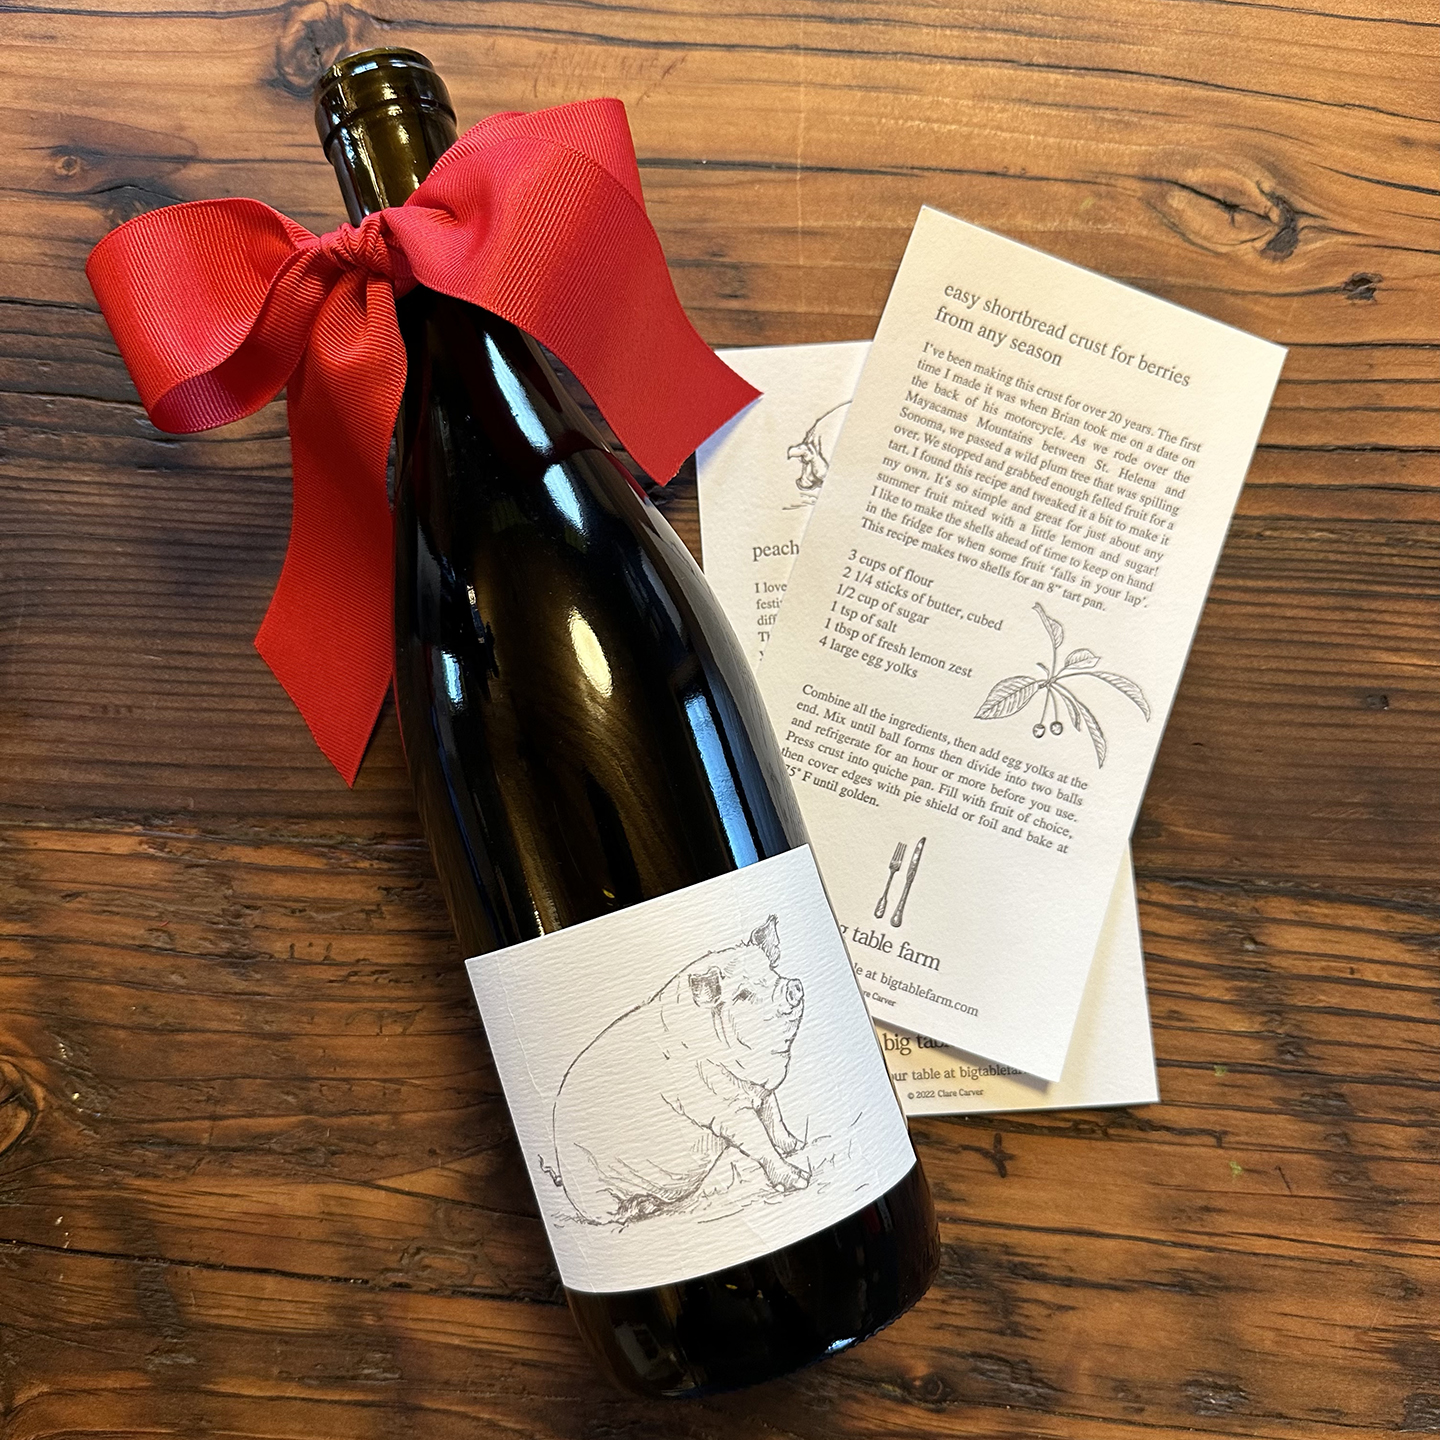 Product Image for Holiday Gift Pack - 2020 Willamette Valley Pinot Noir (shipping included)